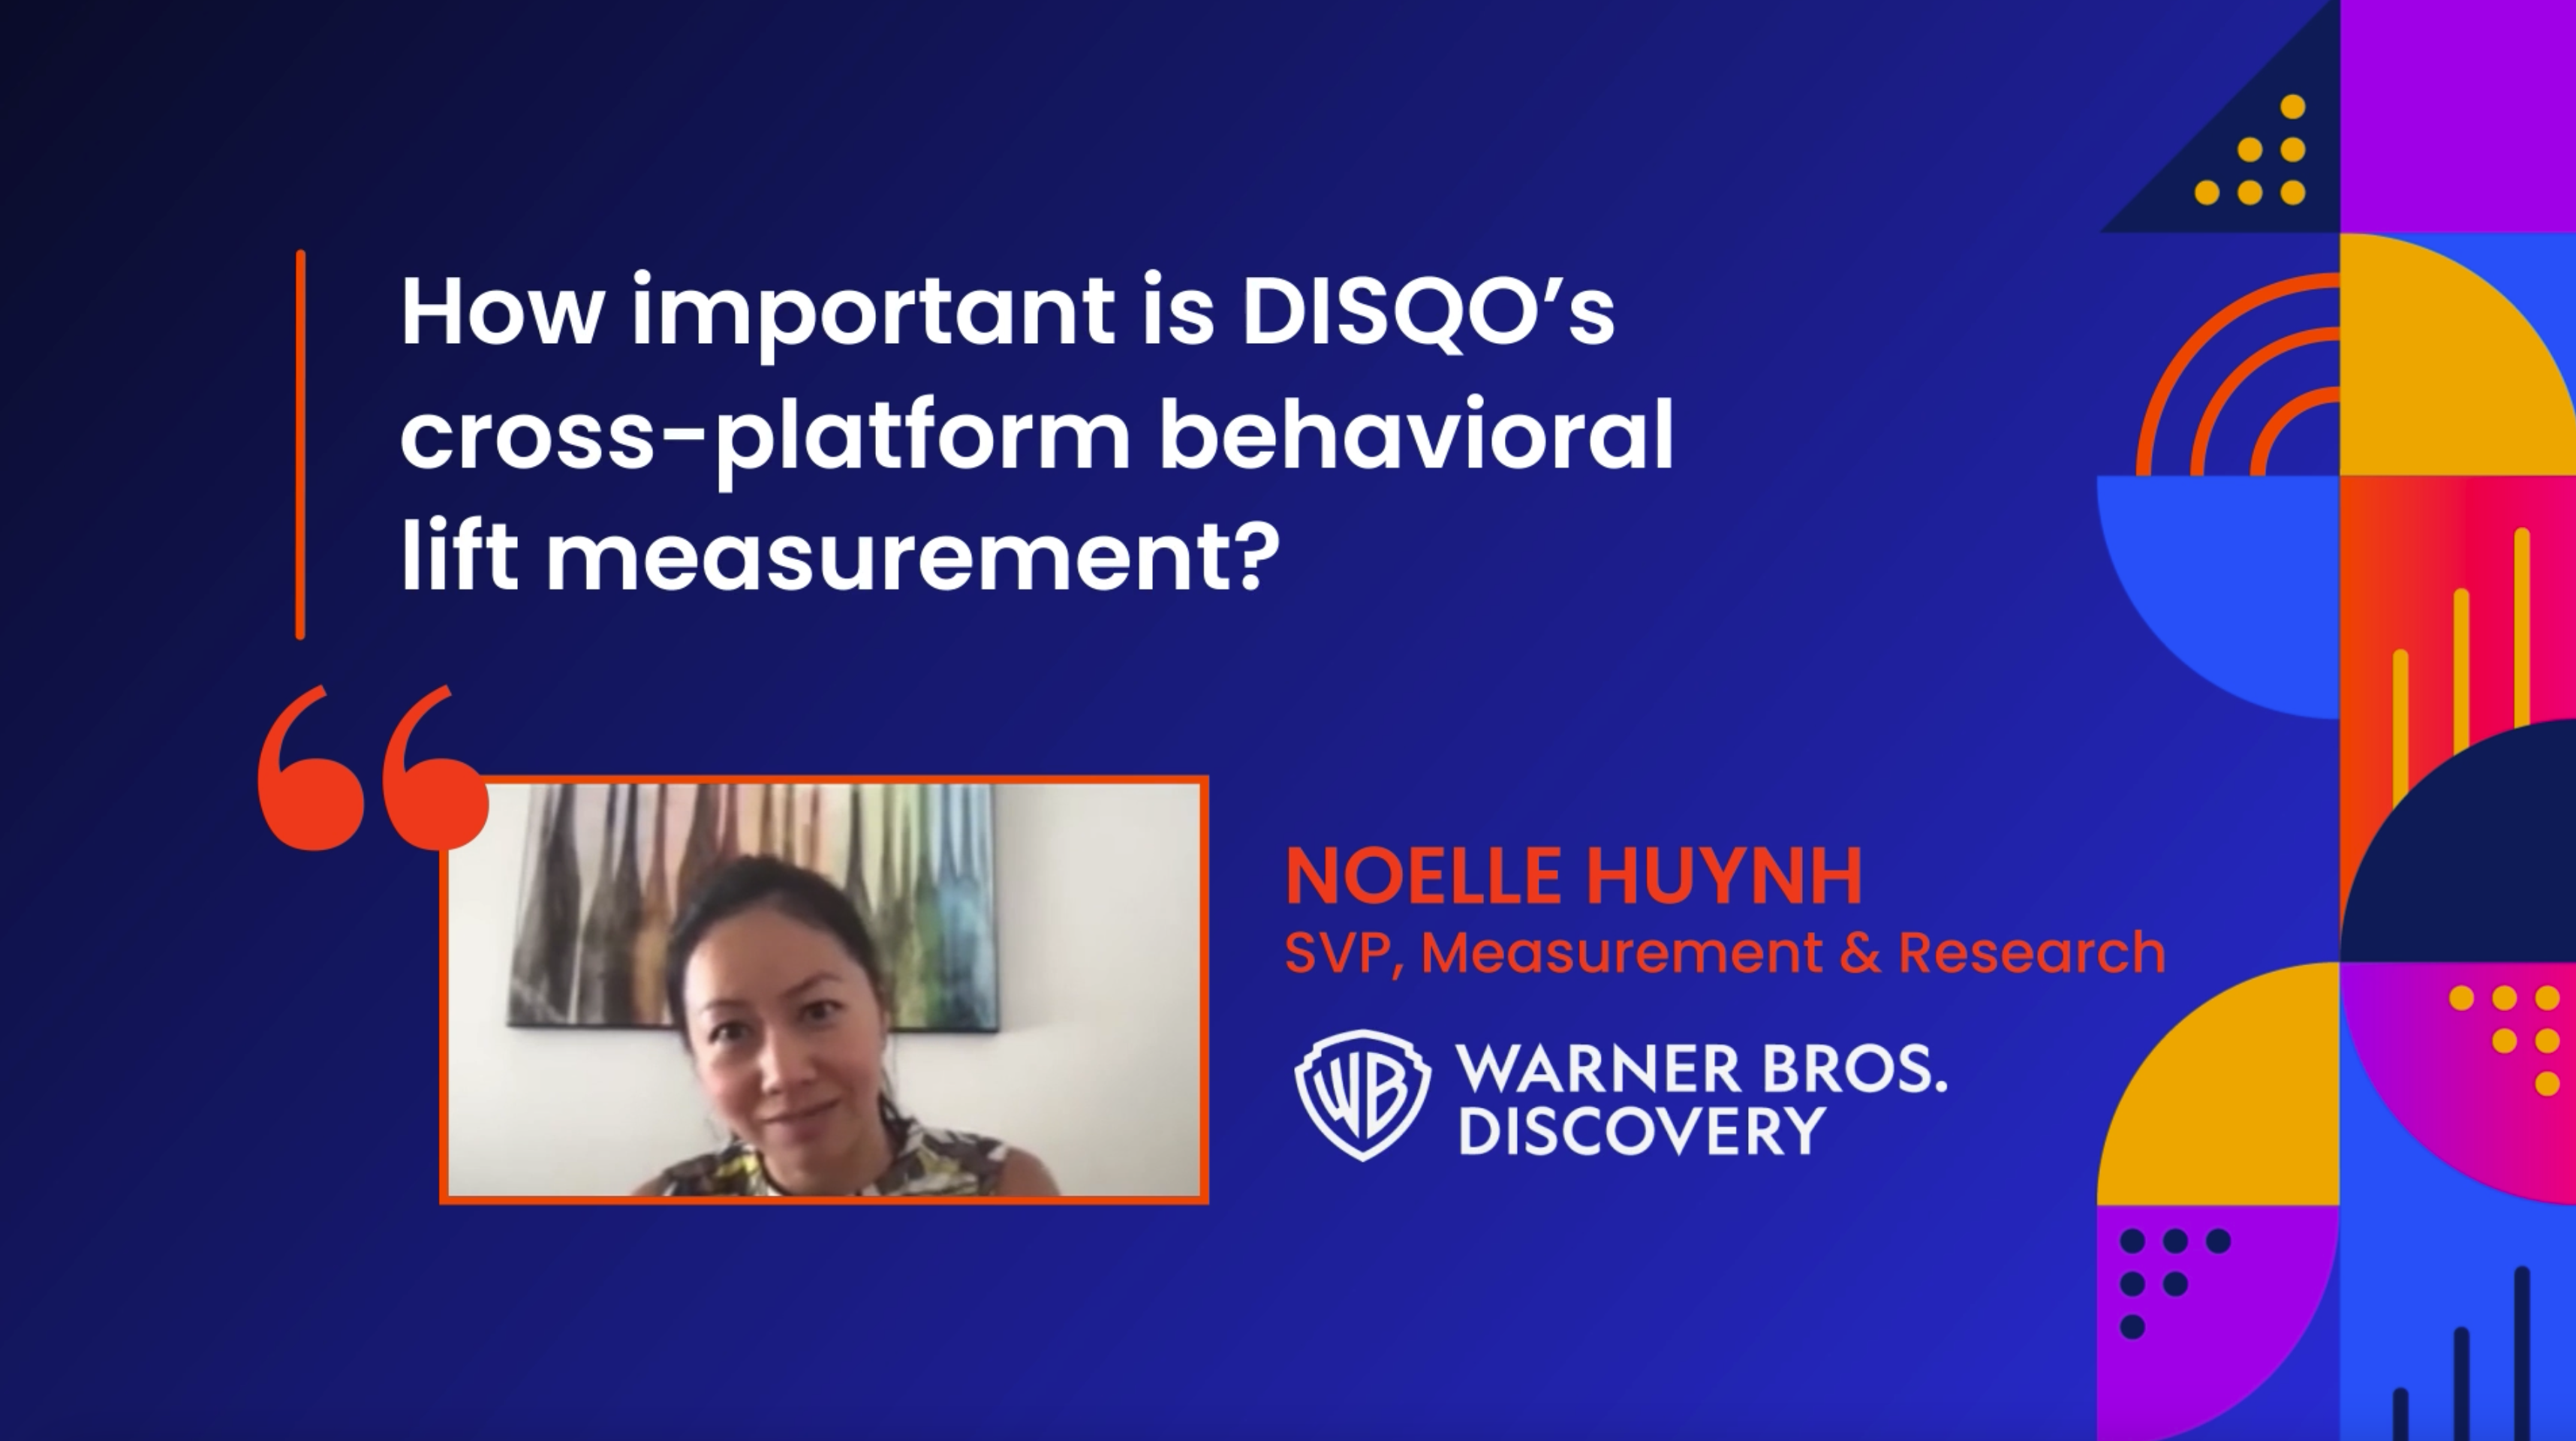 Image of a still from the client video with Warner Bros. Discovery about cross-platform behavioral measurement.